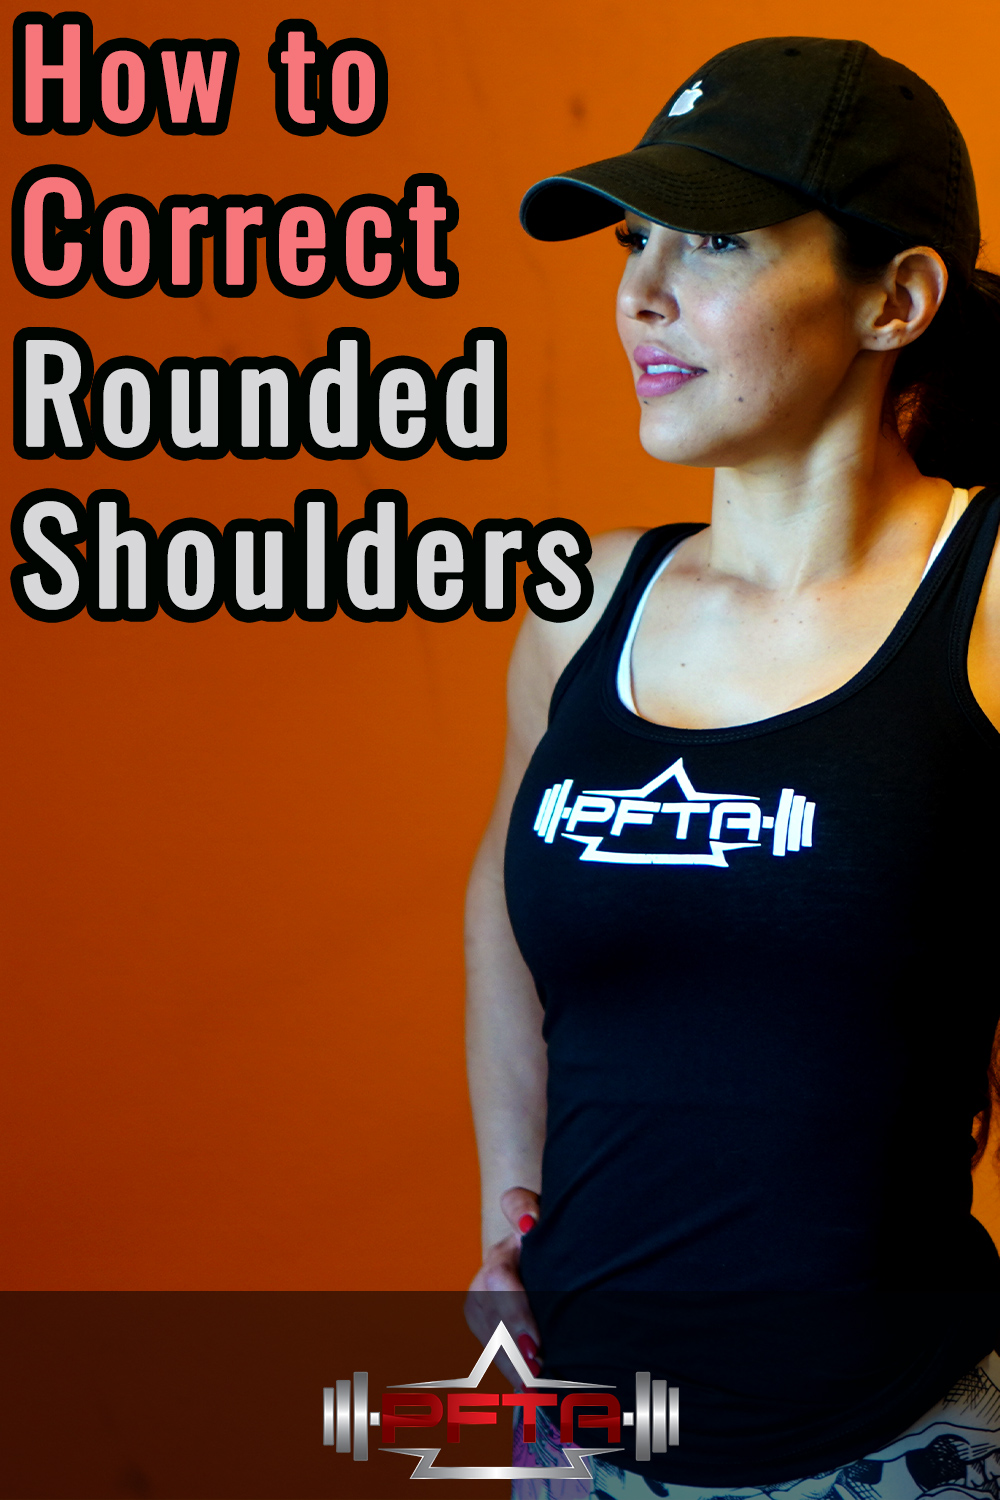 Correcting Rounded Shoulders